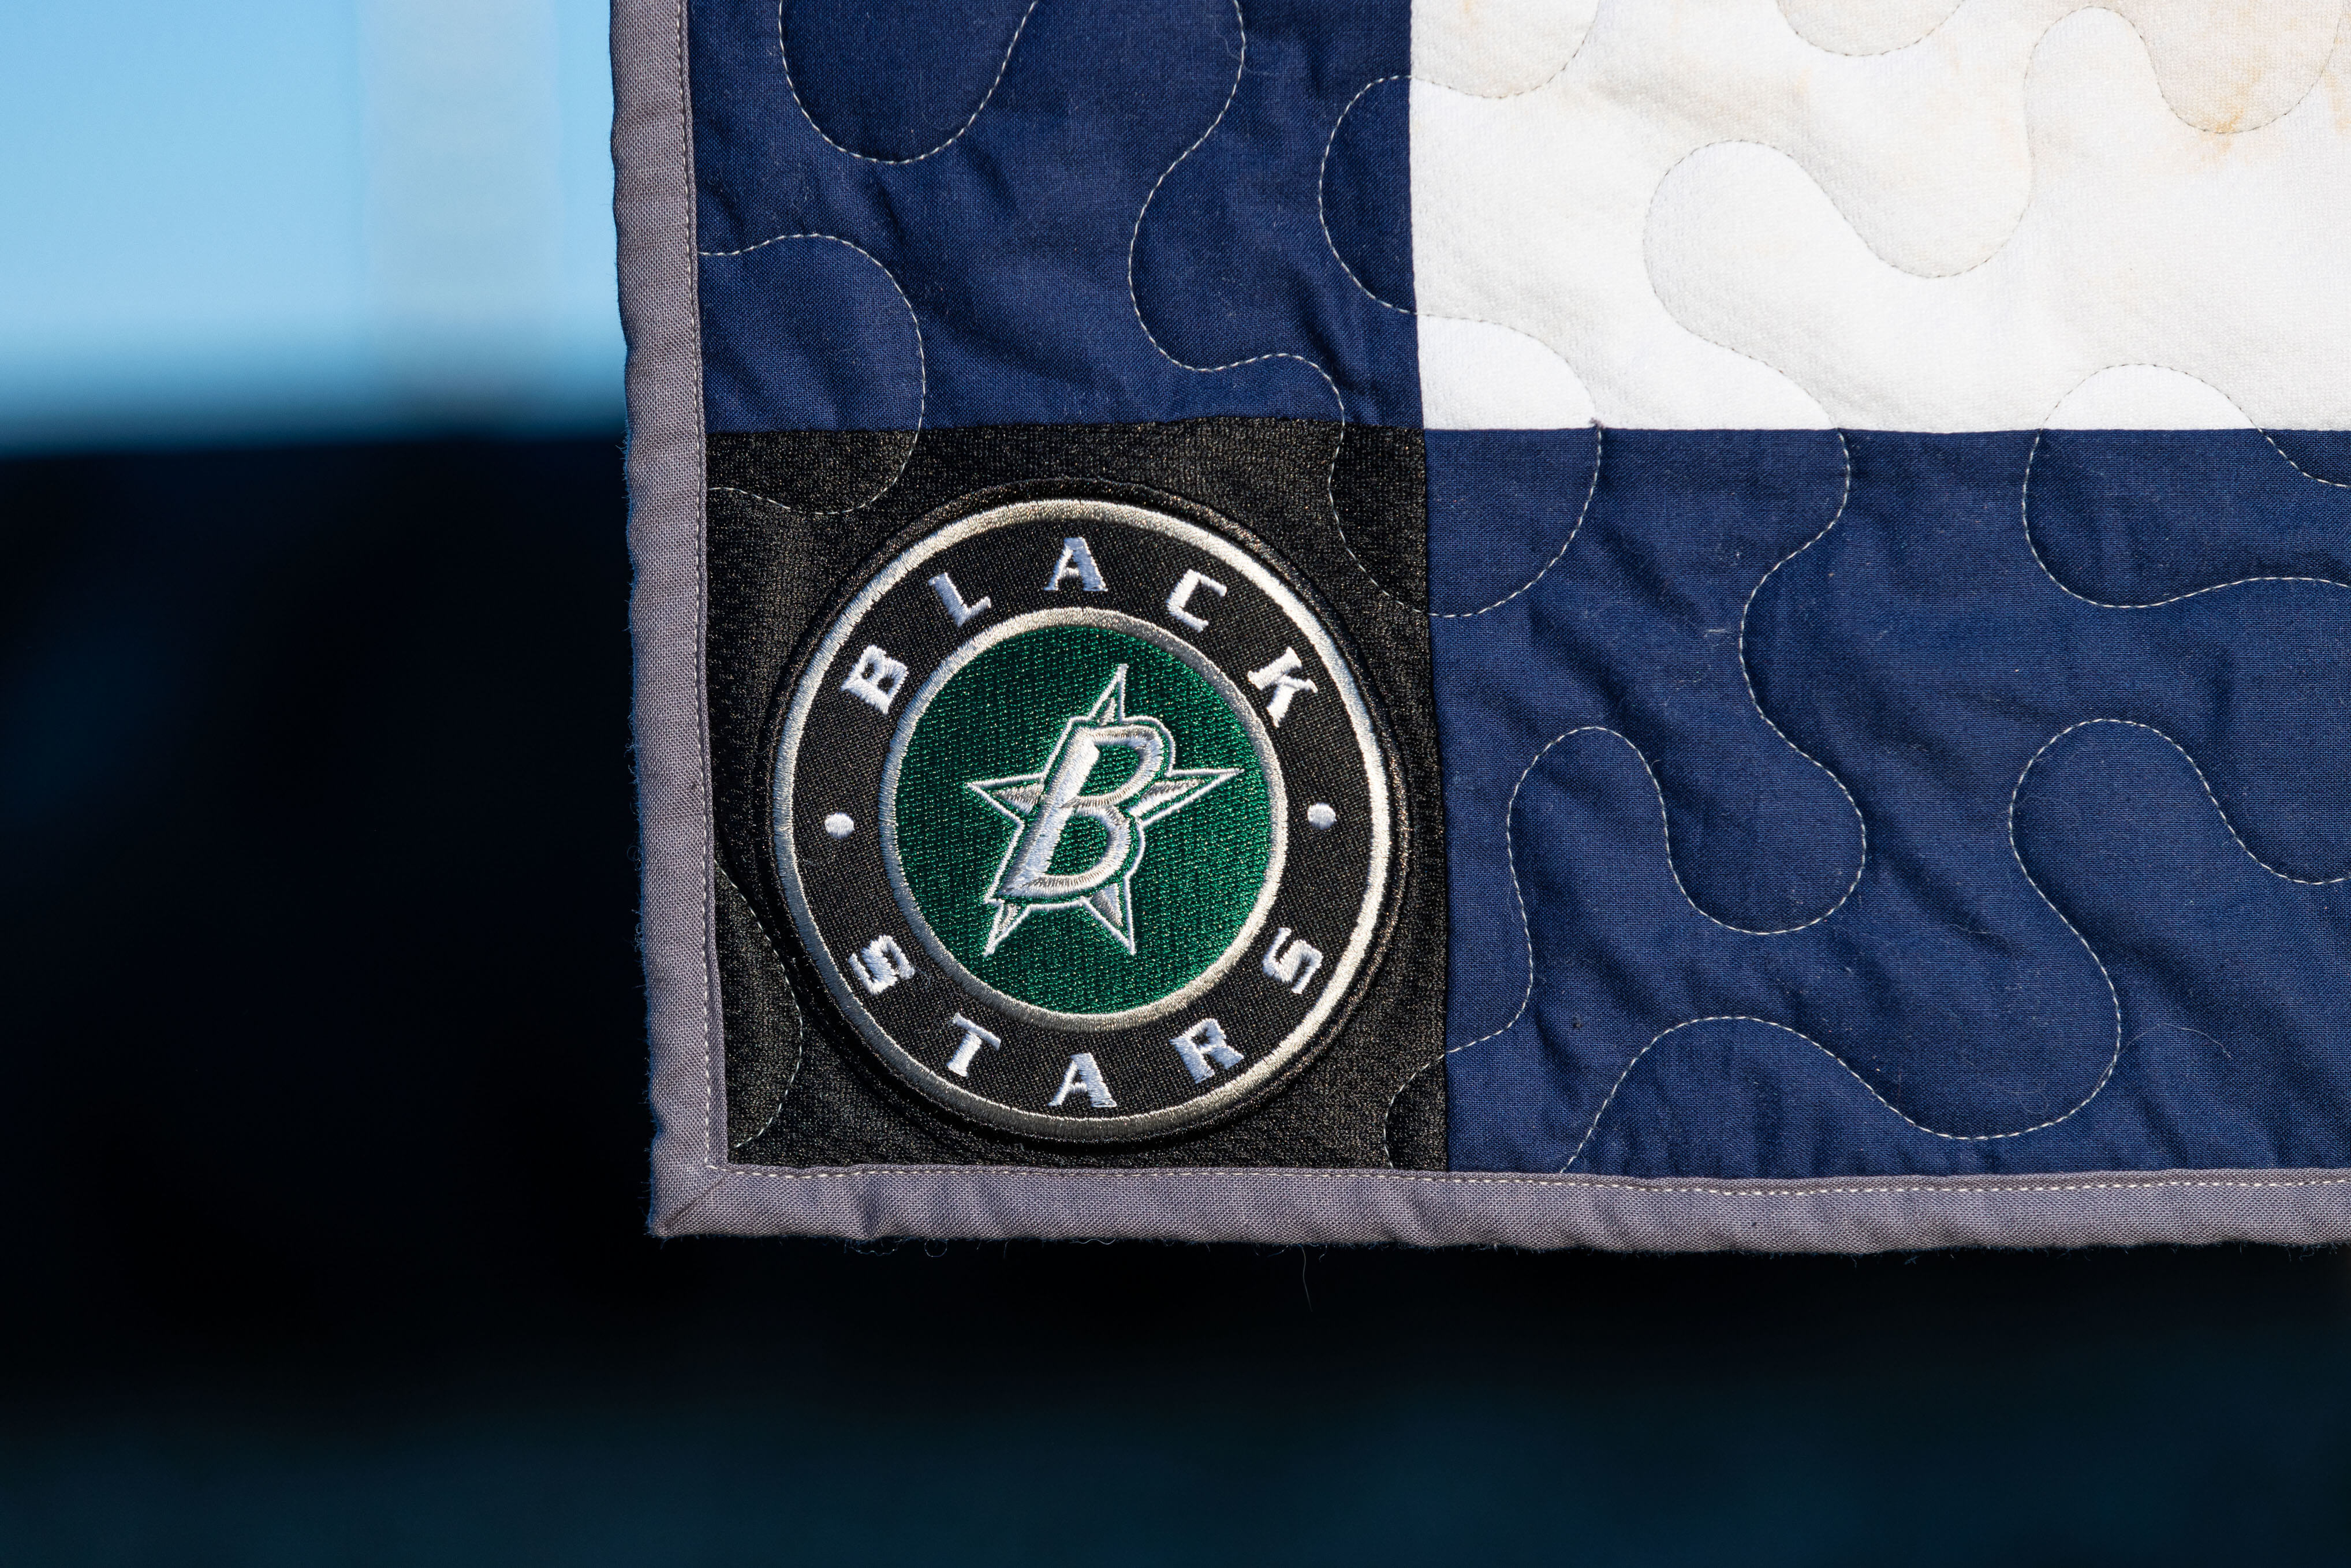 A close up photo of the custom cornerstone on a jerseyblanket